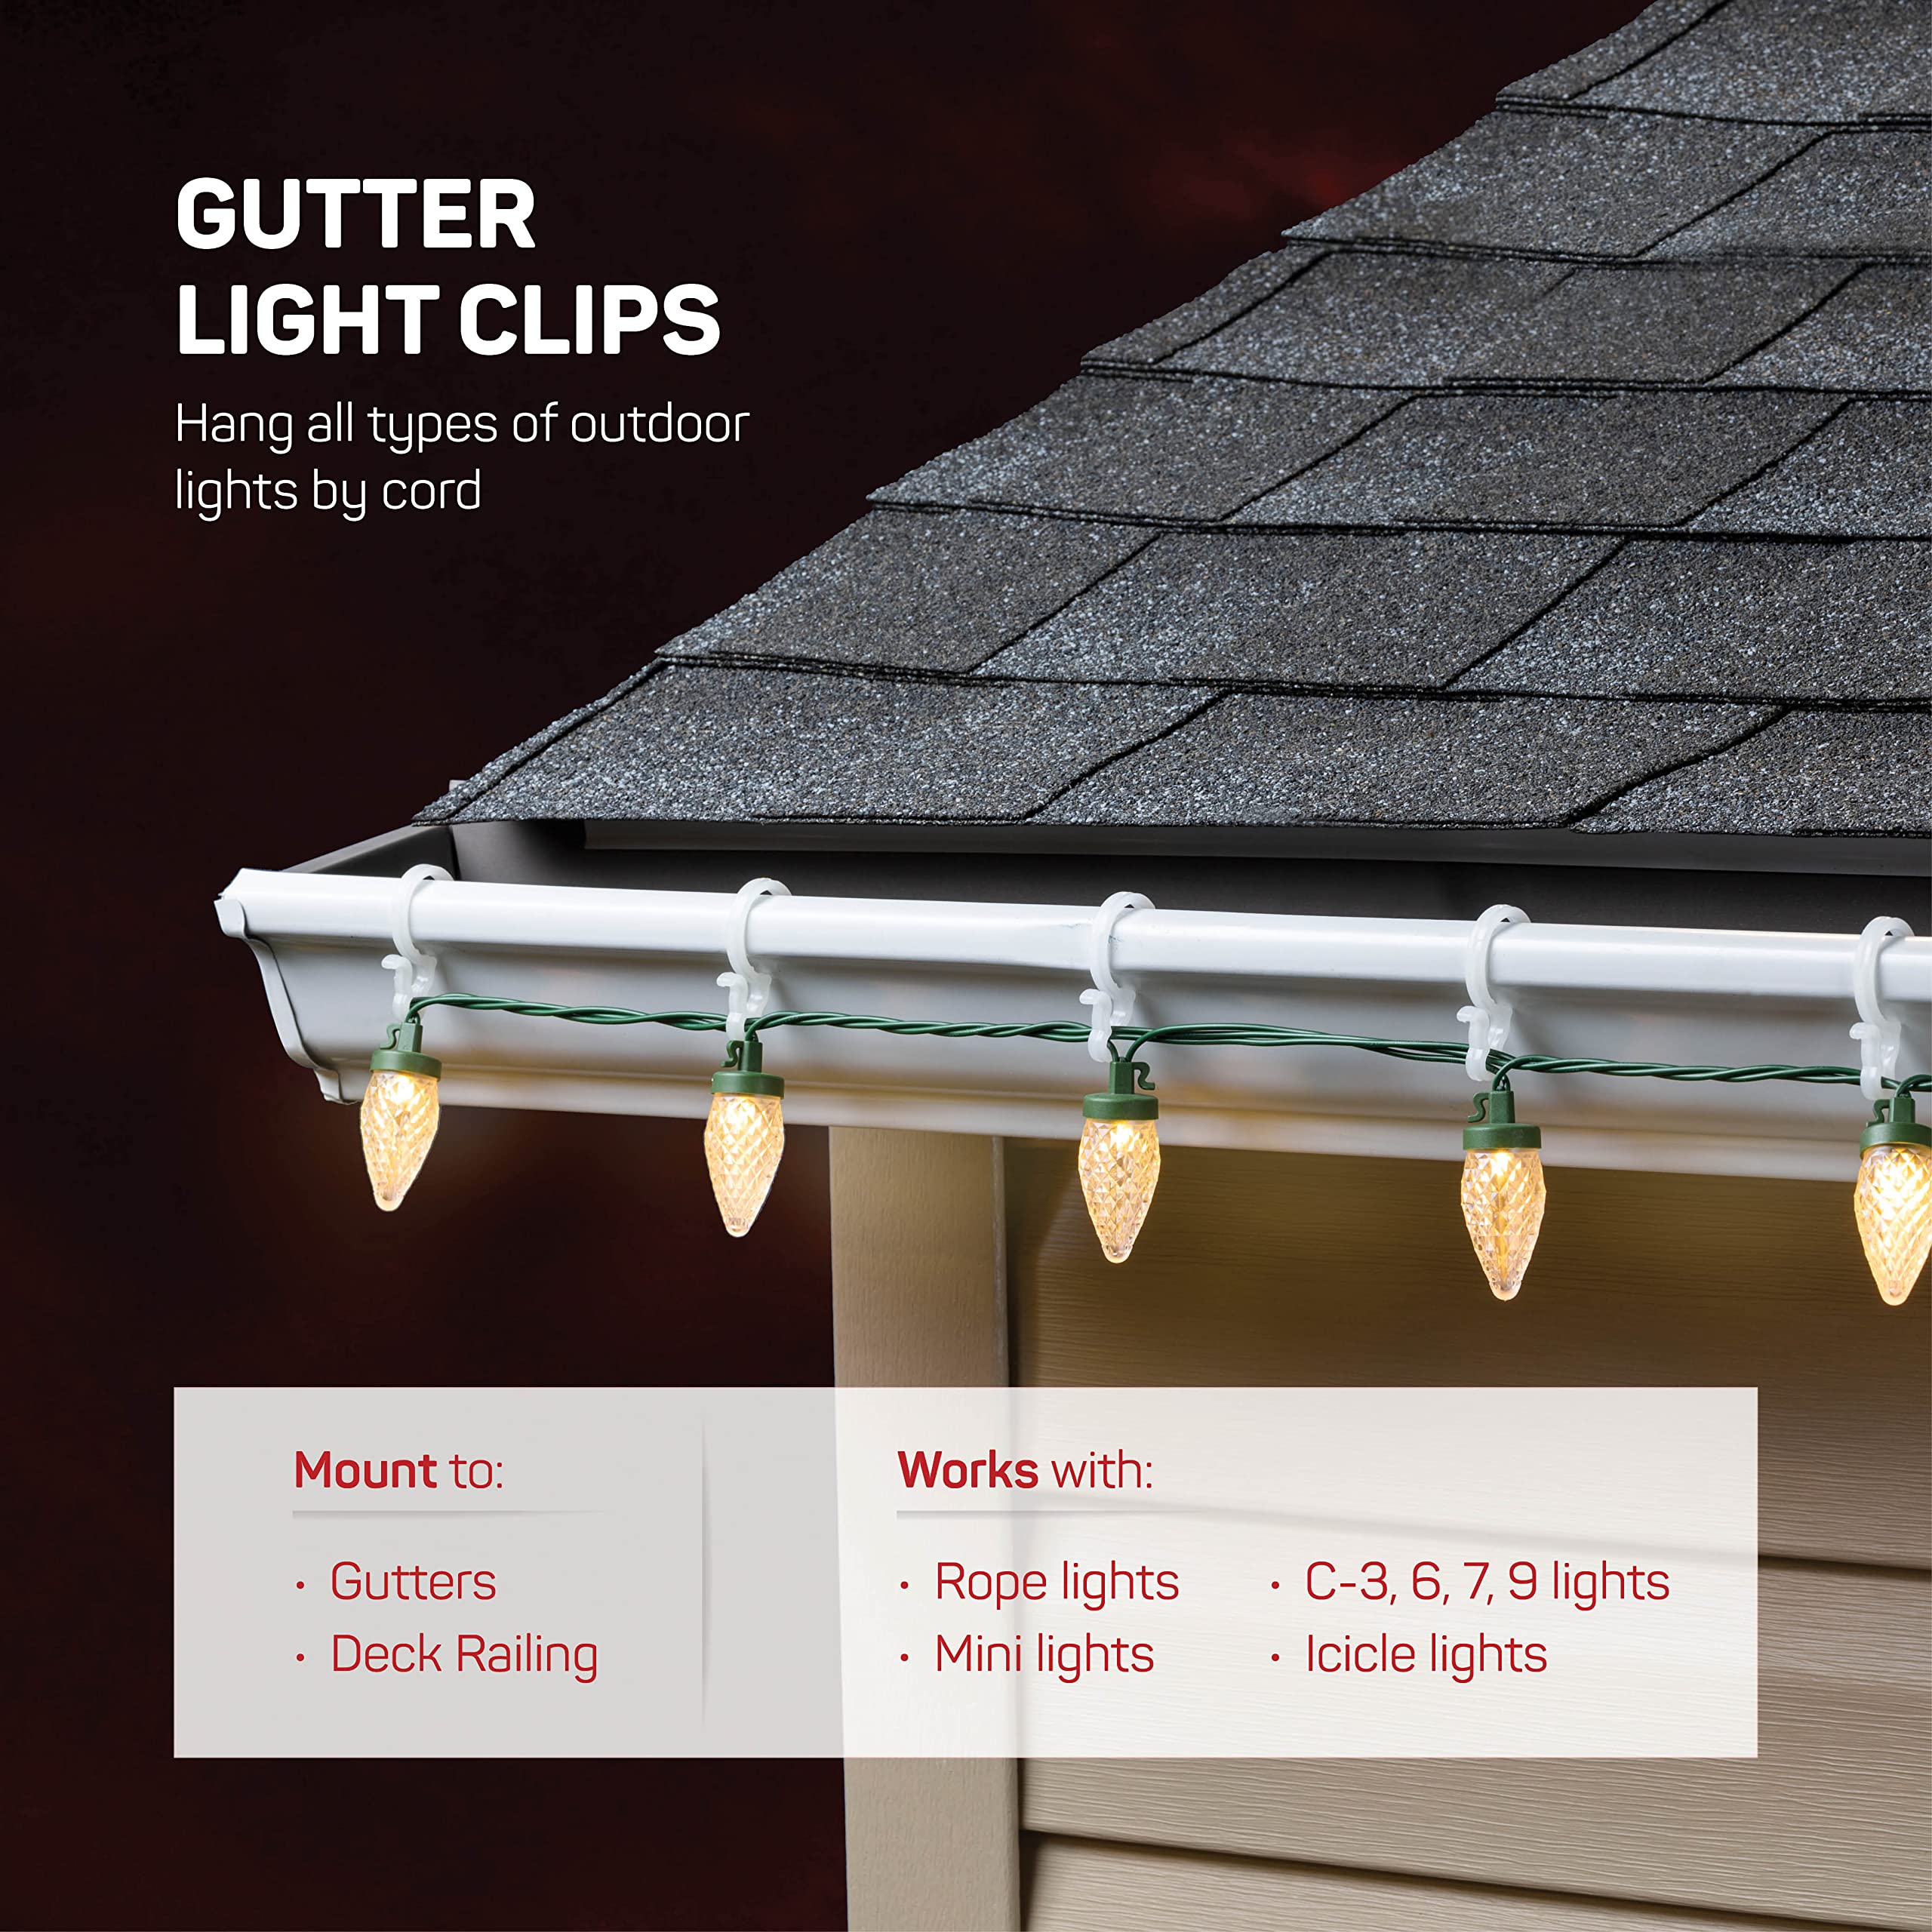 Gutter Light Clips [Set of 200] Gutter Light Clips, Hang By Cord All Type Outdoor Lights C5, C6, C7, C9, Mini, Icicle, Rope Lights. Christmas Light Clips Outdoor - No Tools Required - USA Made  - Very Good